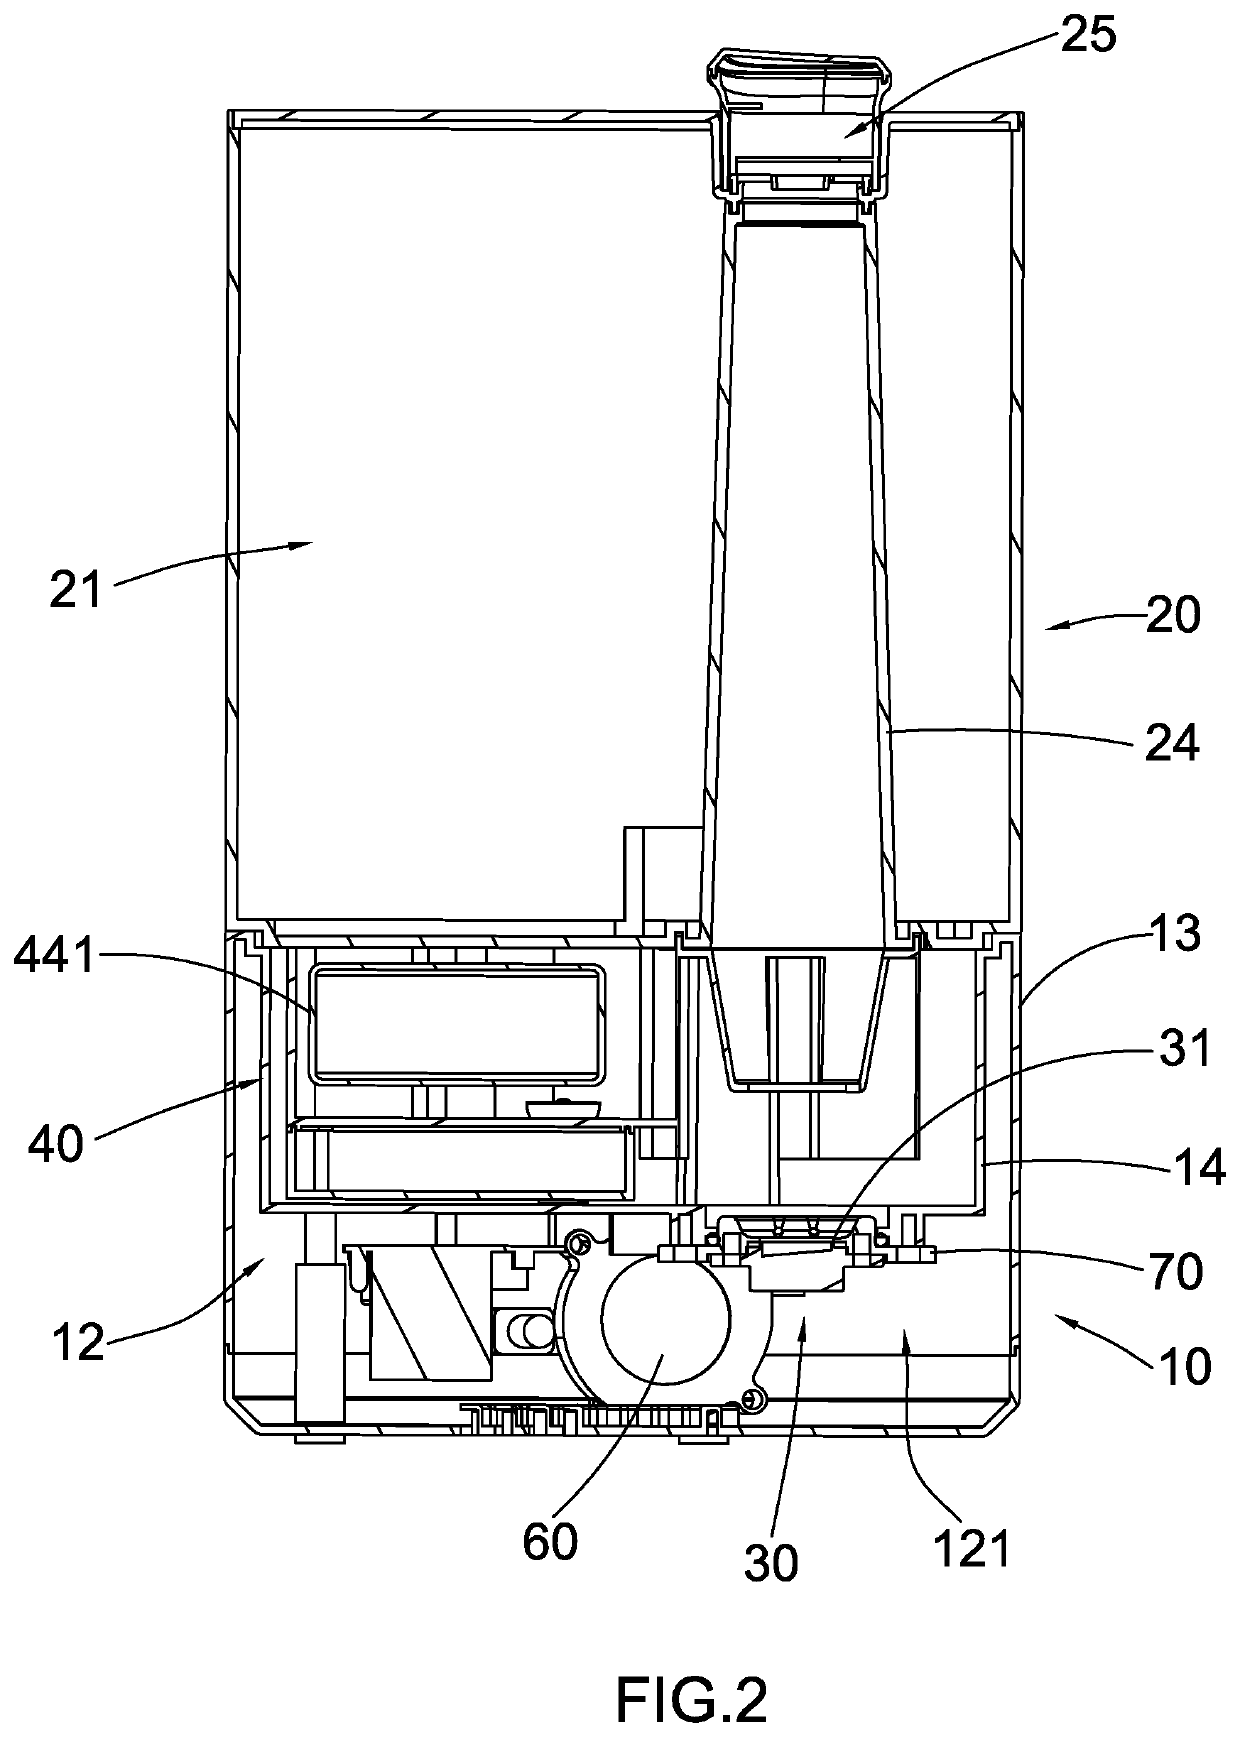 Humidifier with flow control arrangement